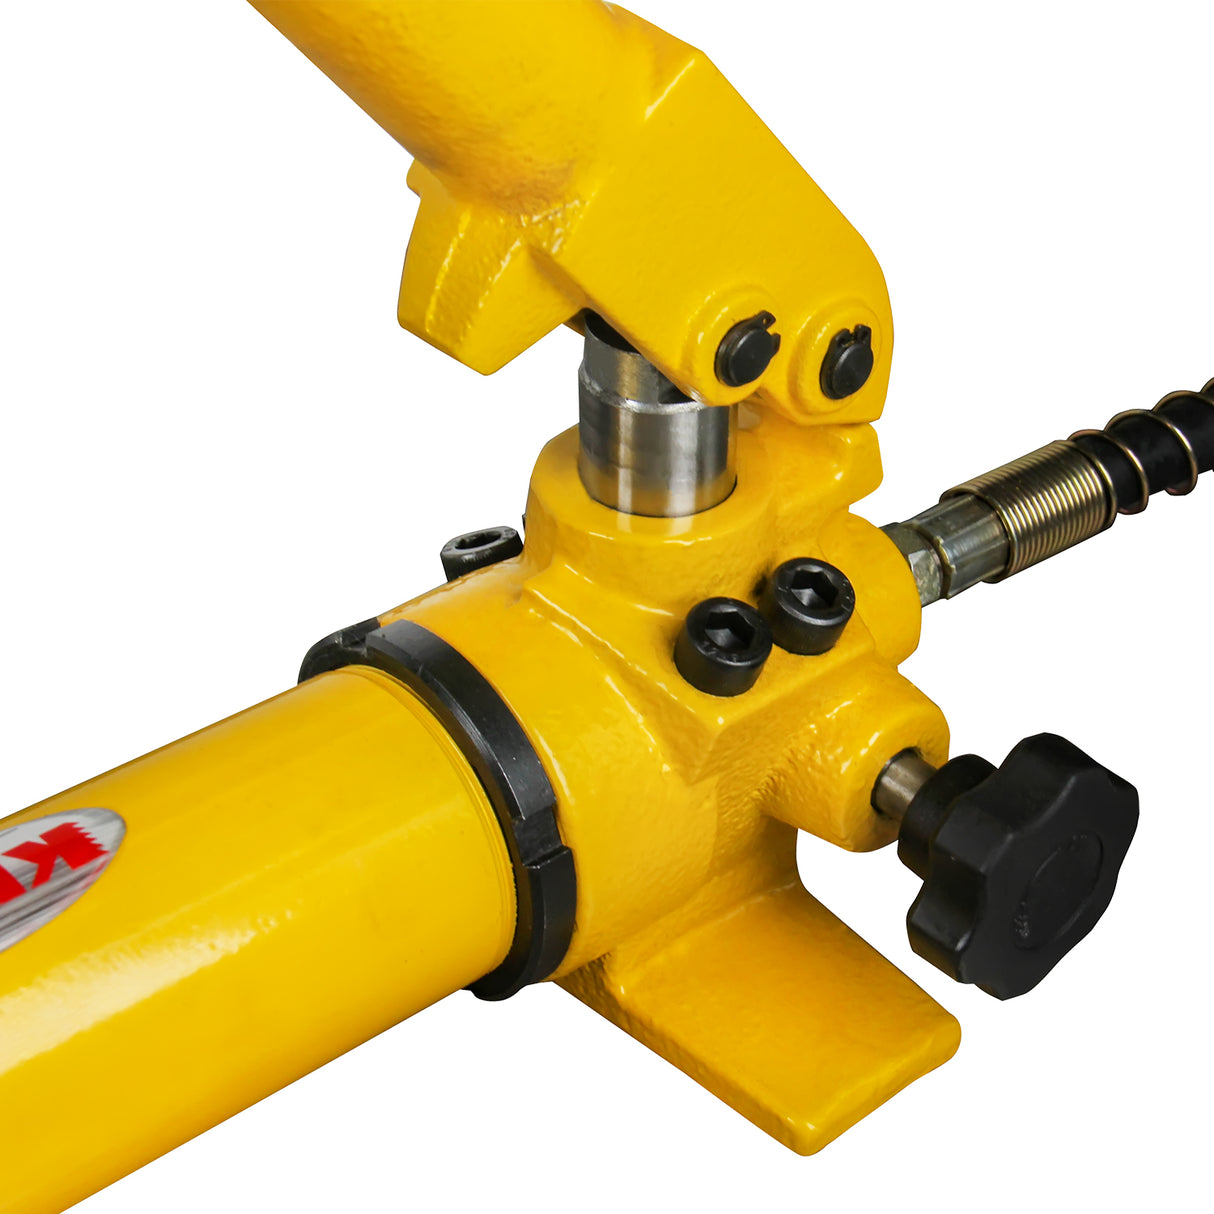 DHHHC Hydraulische Handpumpe Manuelle Ram-Pumpe Power Pump Oil Pipe Joint  ZG3 / 8For Hydraulic Tools,Hd700 : : Sonstiges